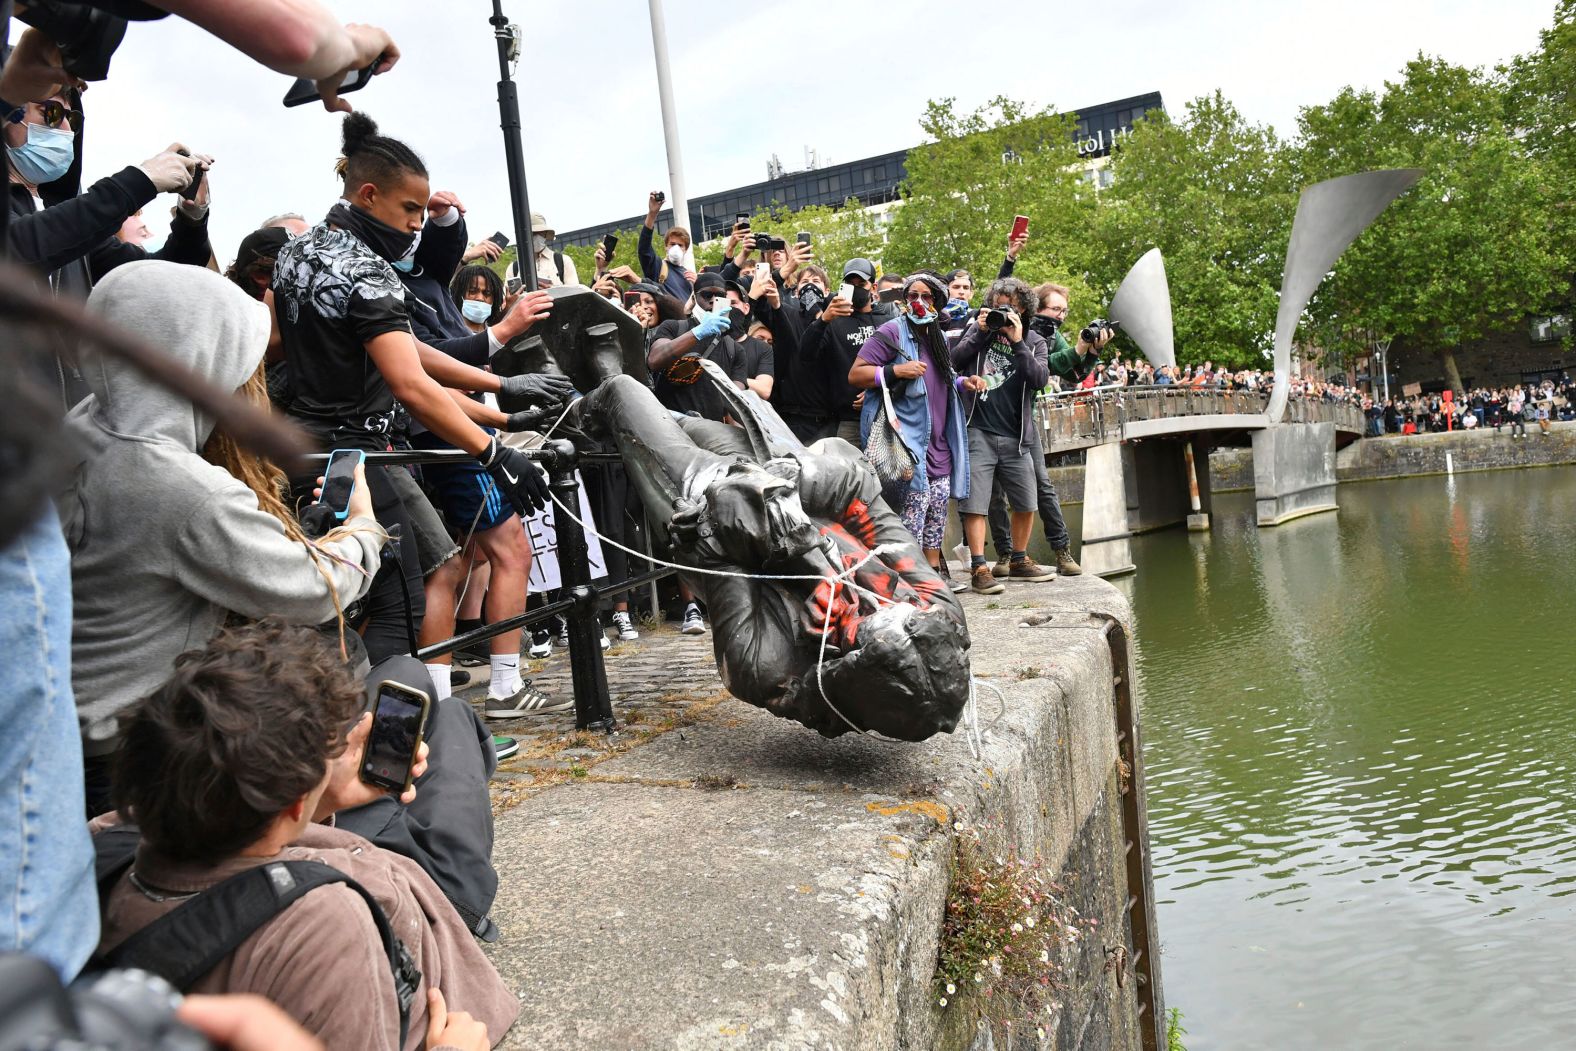 Protesters throw a statue of Edward Colston into Bristol Harbor in Bristol, England, on June 7. Colston was a <a href="https://www.cnn.com/2020/06/07/world/global-floyd-protests-weekend-intl/index.html" target="_blank">17th century slave trader.</a>